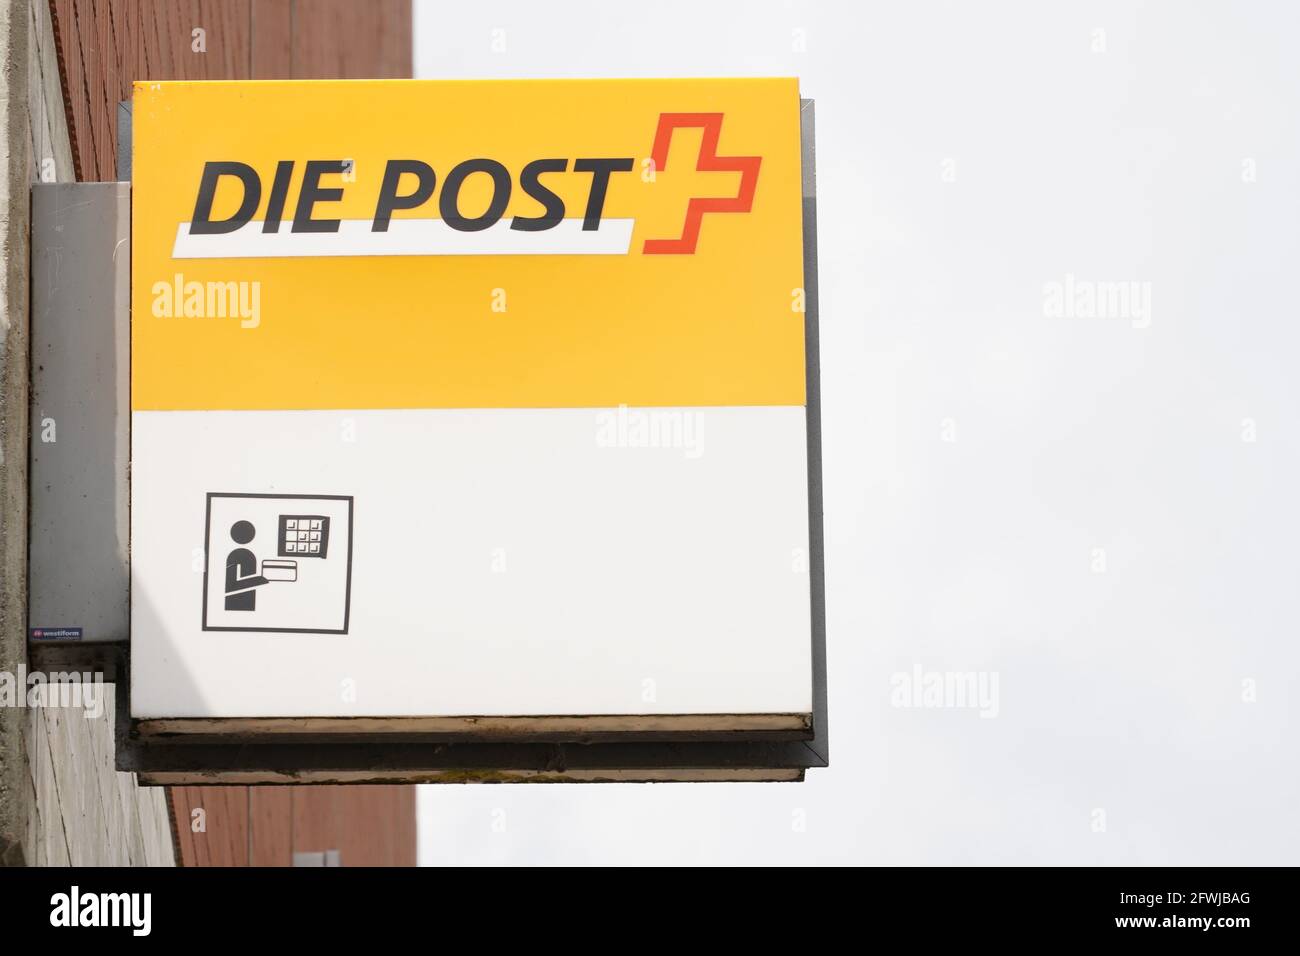 Swiss national postal service logo with its name in German language. Stock Photo